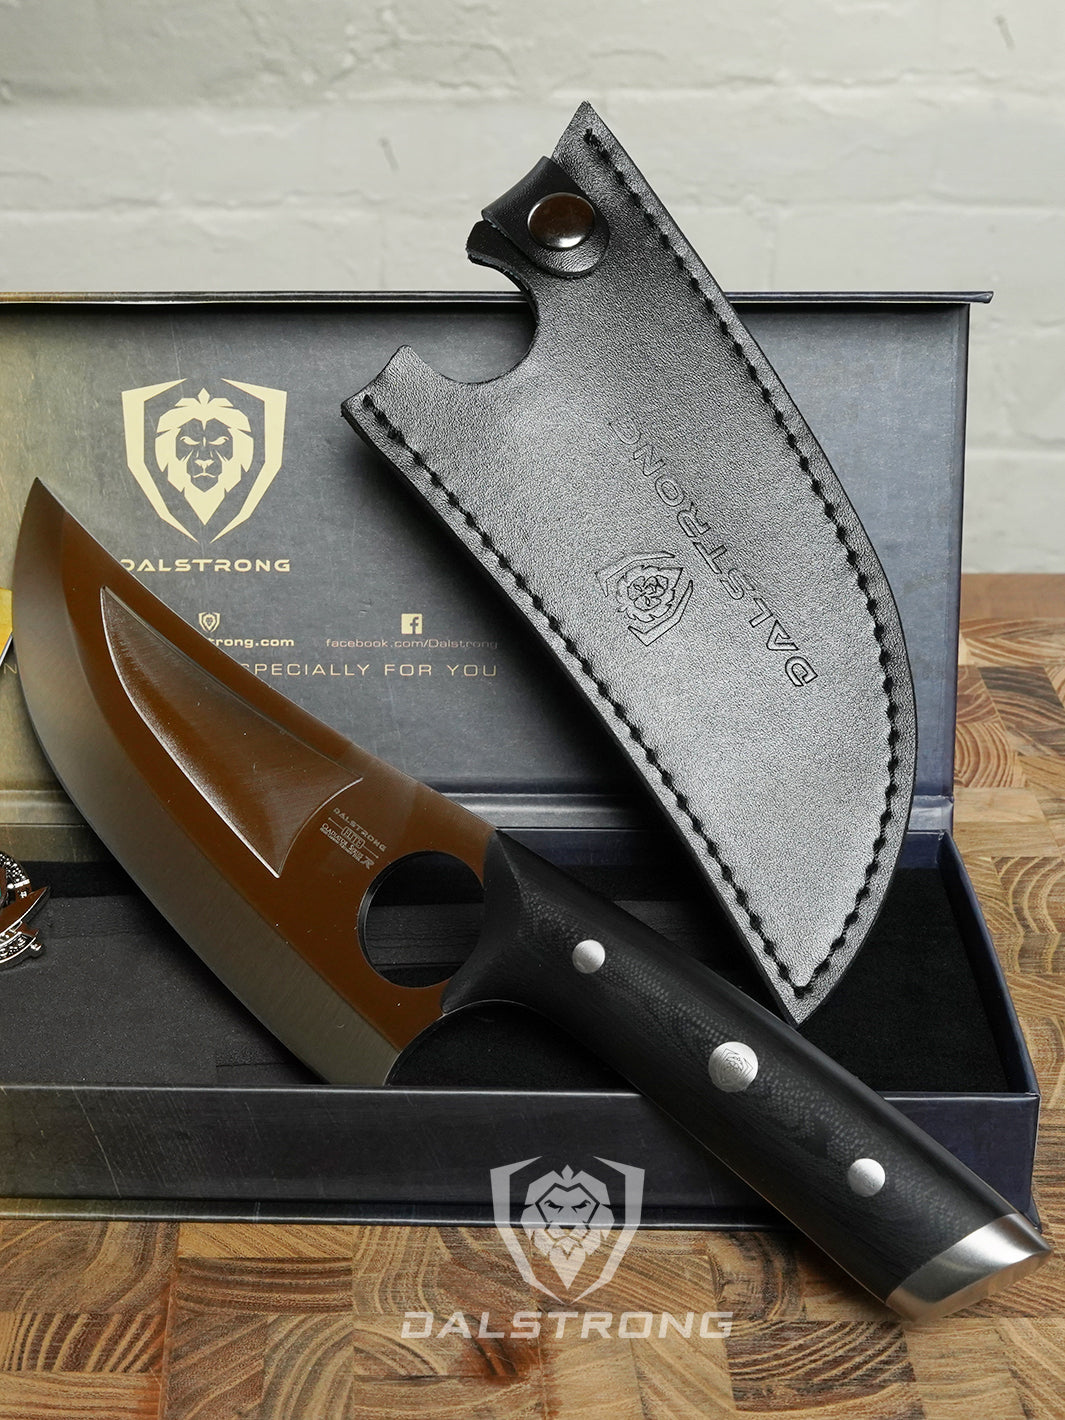 Dalstrong gladiator series 7 inch venator knife with black handle and sheath ouside it's premium packaging.